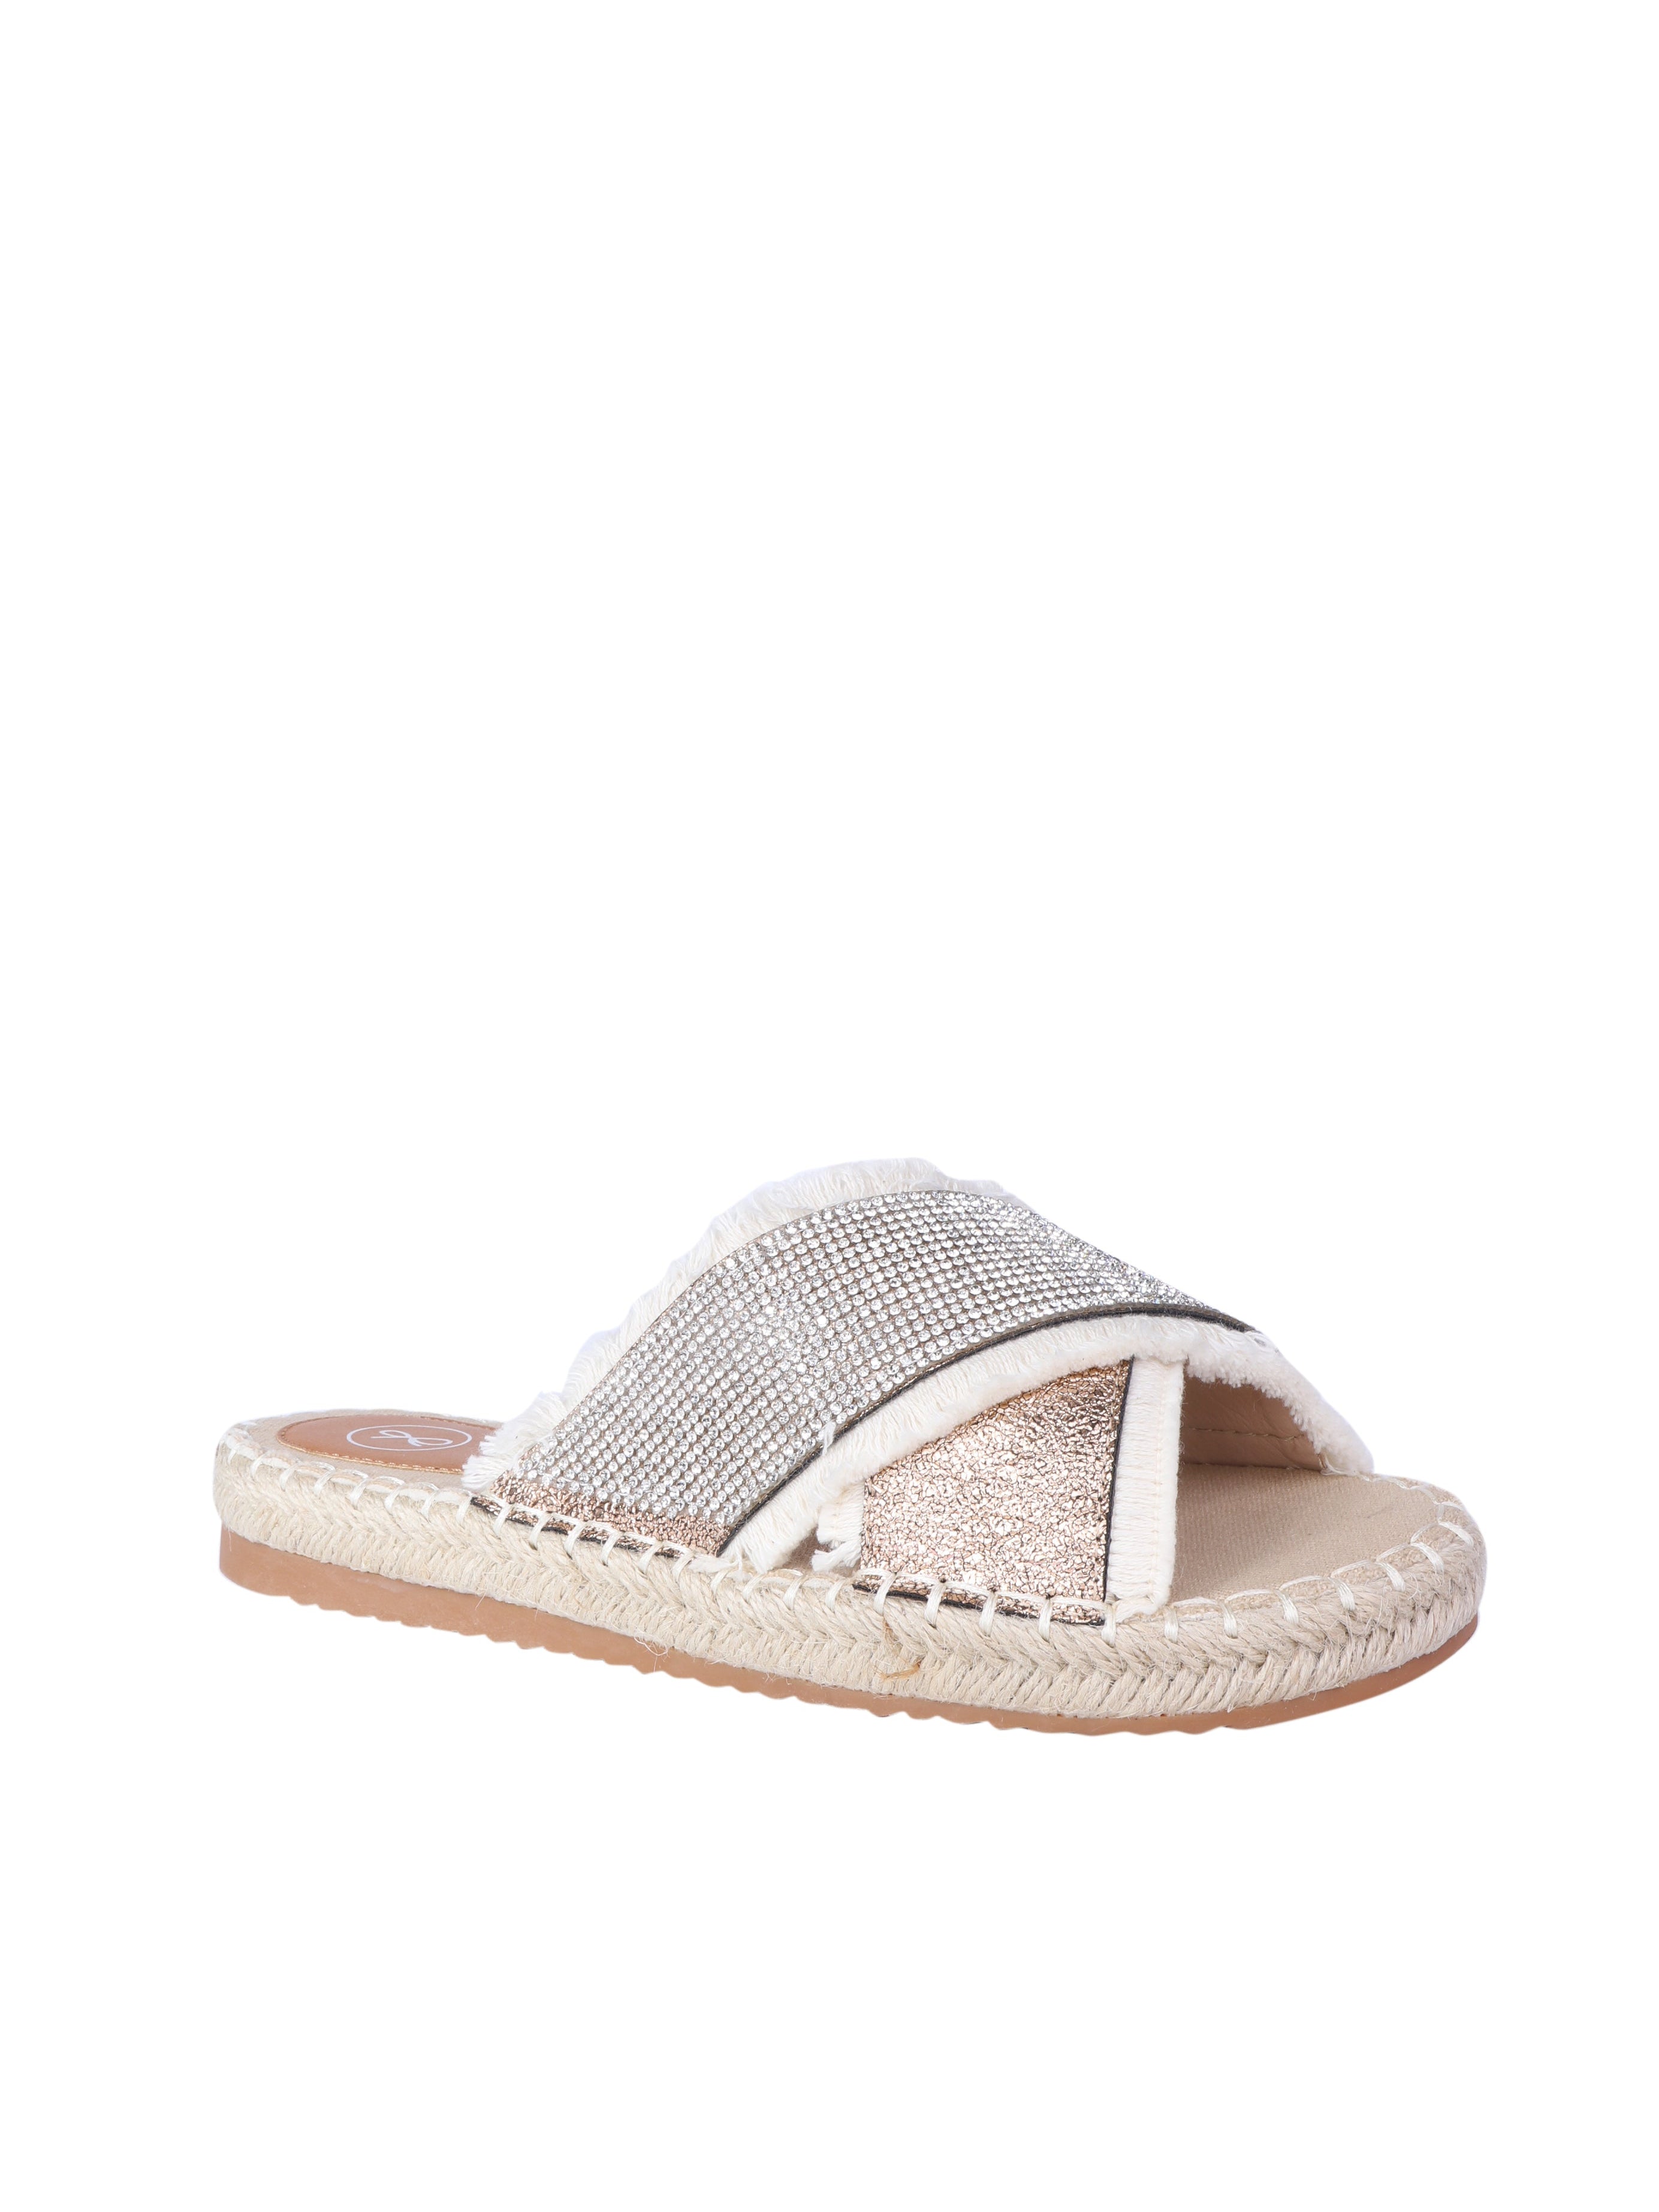 Criss cross espadrilles sandals with bling